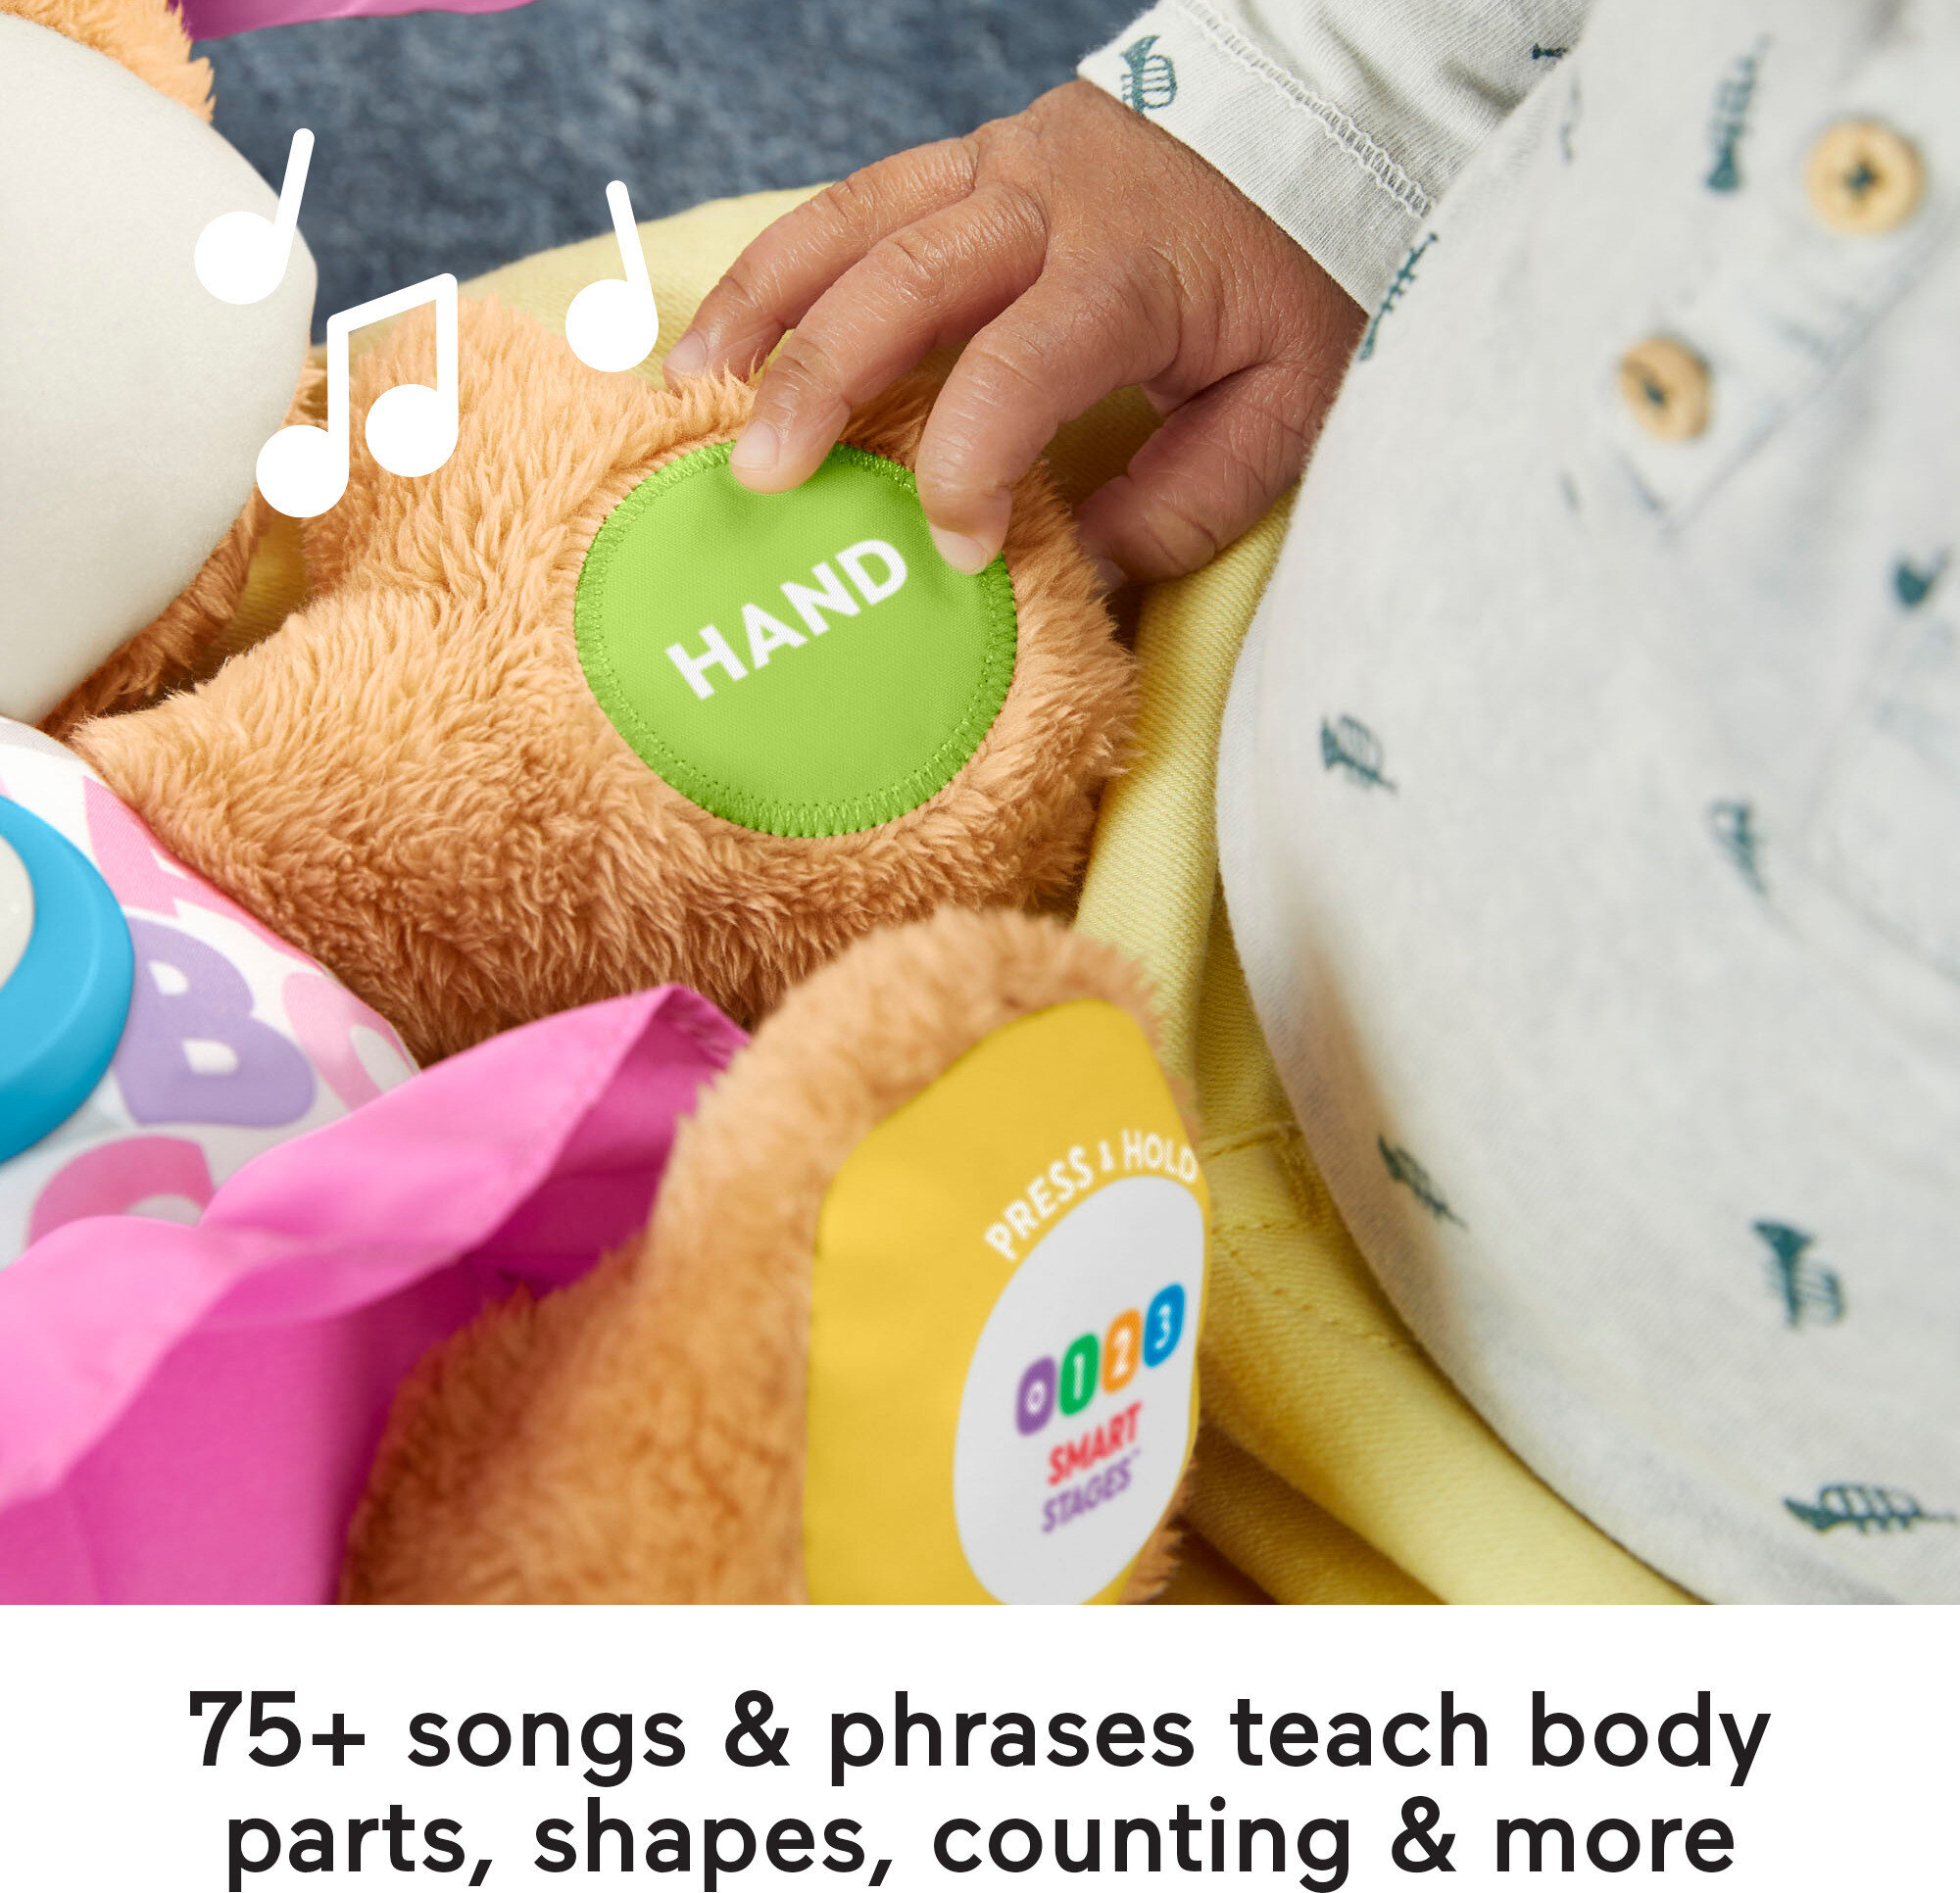 Fisher-Price Laugh & Learn Smart Stages Sis Puppy Plush Learning Toy for Baby, Infants and Toddlers, 6 months and up - image 5 of 8